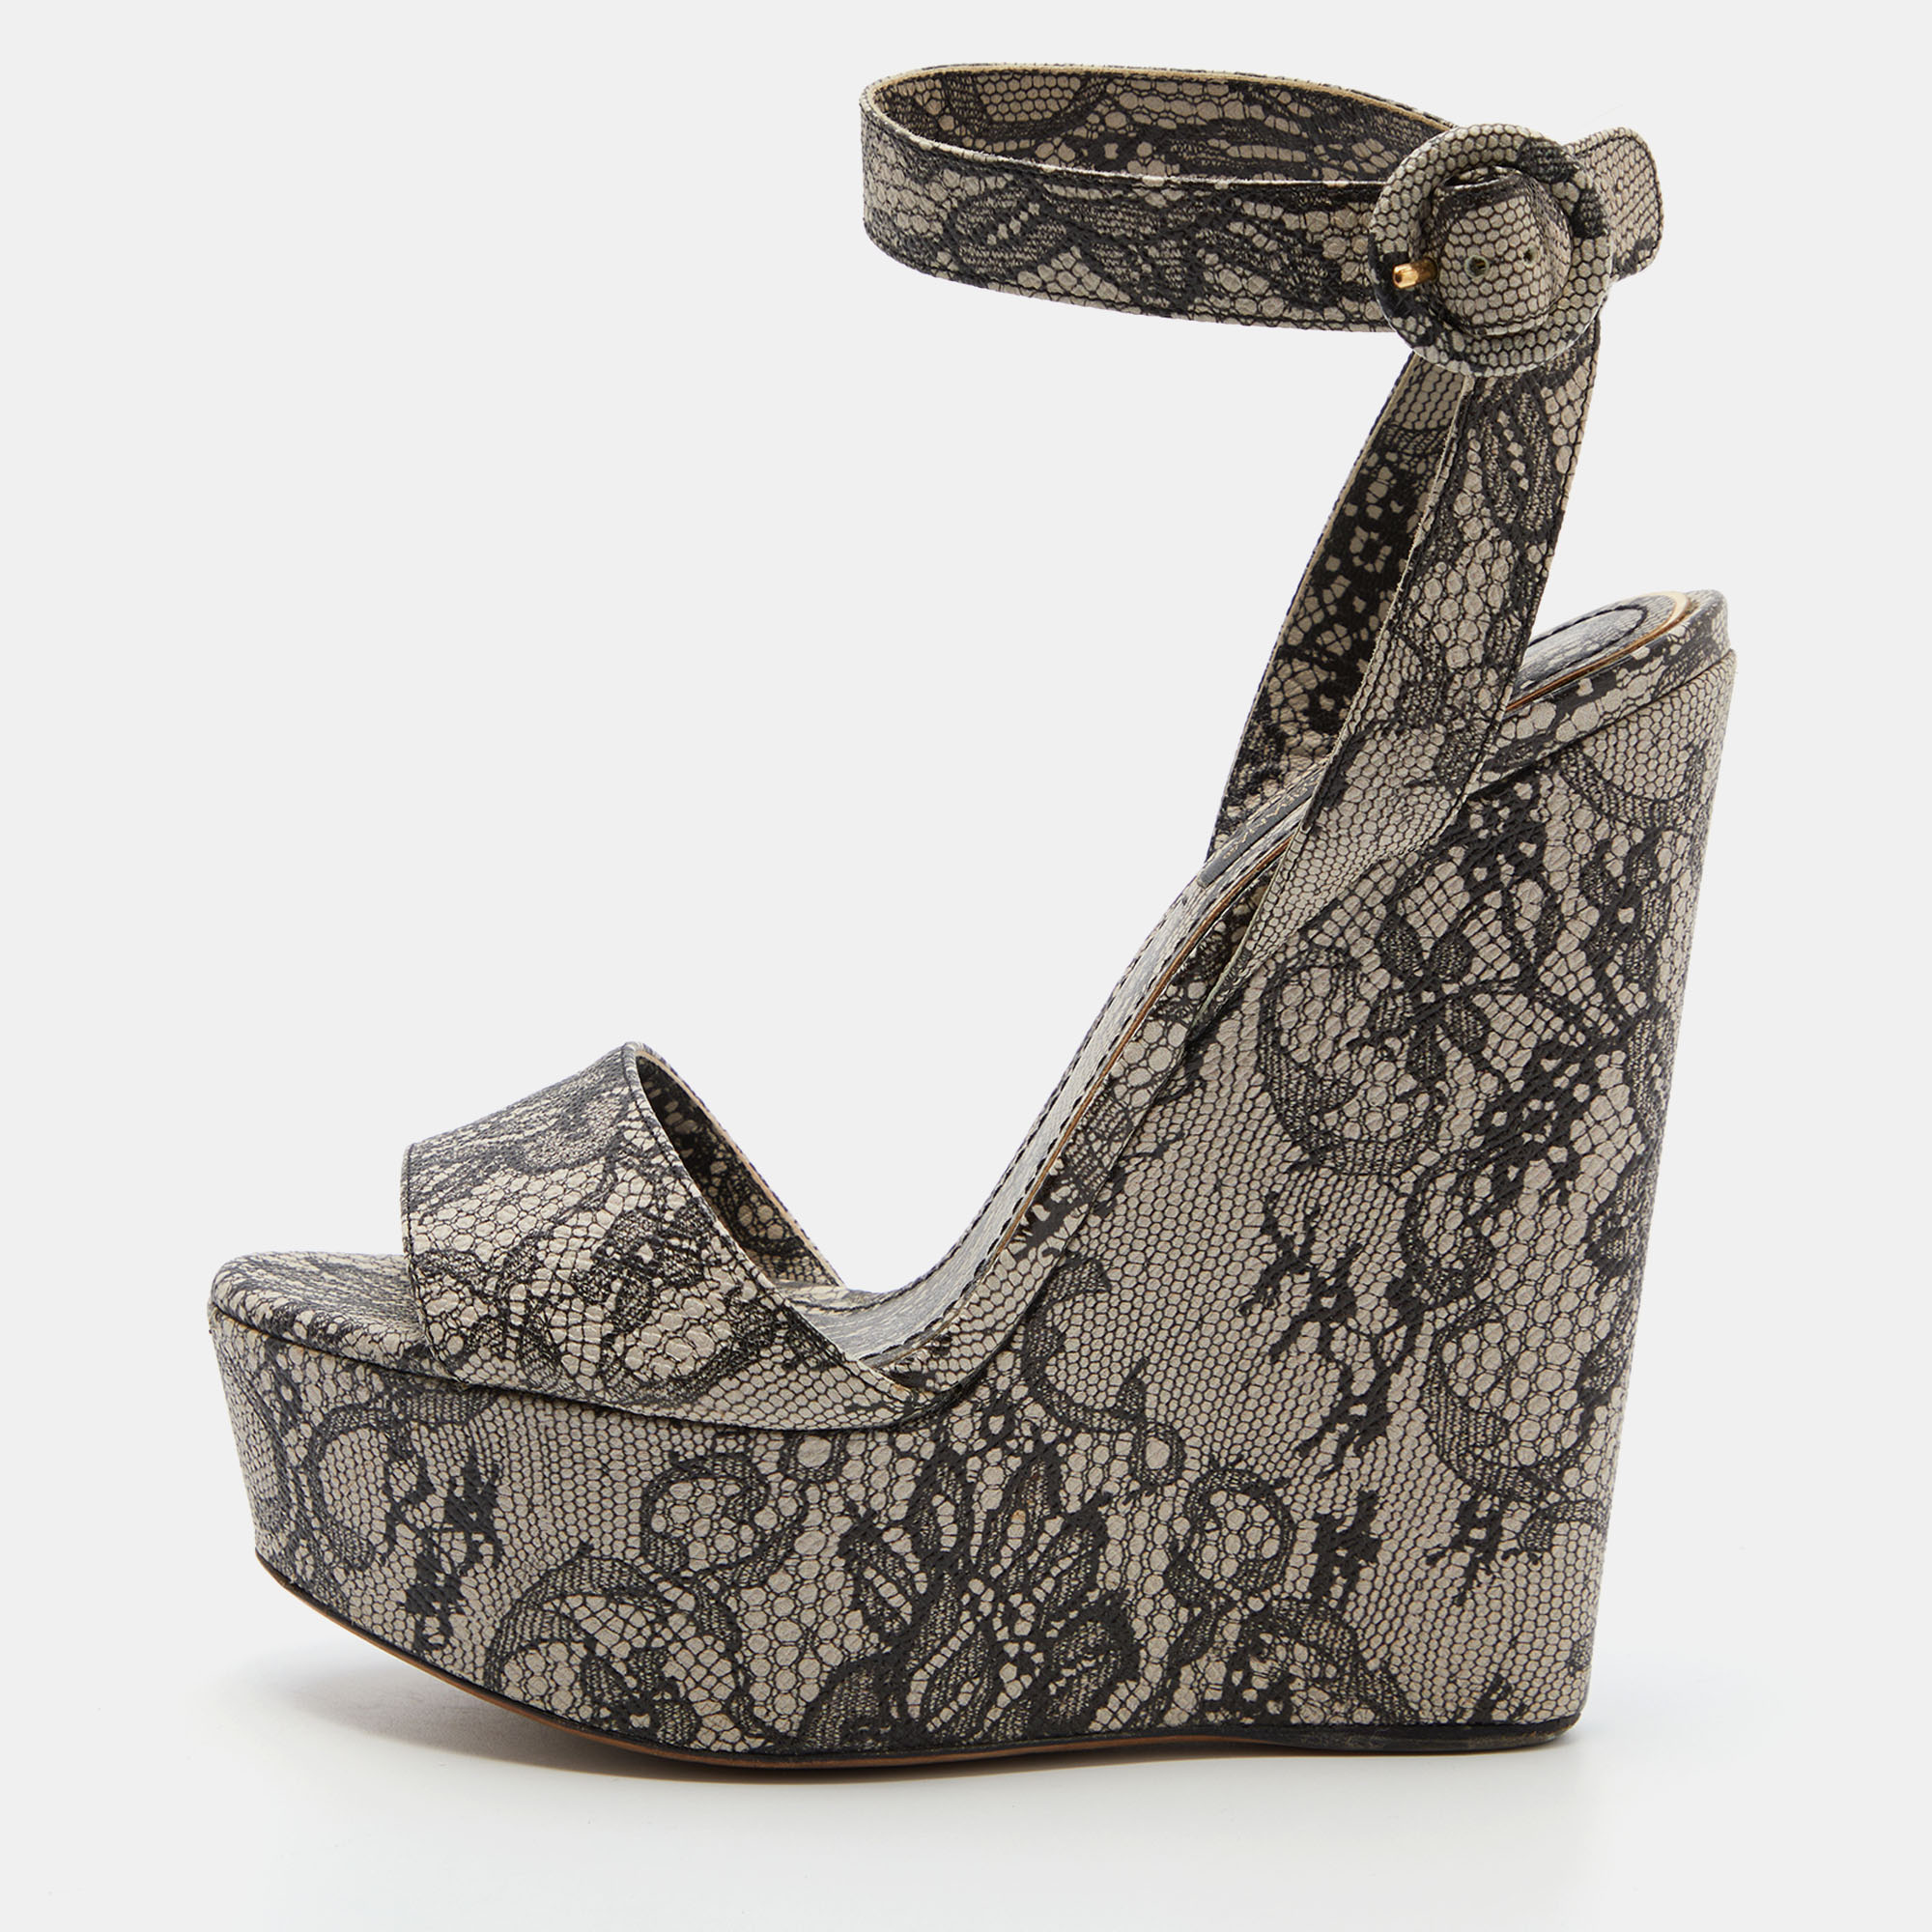 These Dolce and Gabbana sandals with their contemporary shape perfectly capture the elegance of a woman. Beautifully crafted from lace they are made striking with striking print and are secured with an ankle buckle closure. The wedge heels and platforms of this pair will reflect luxury and grace in every step.